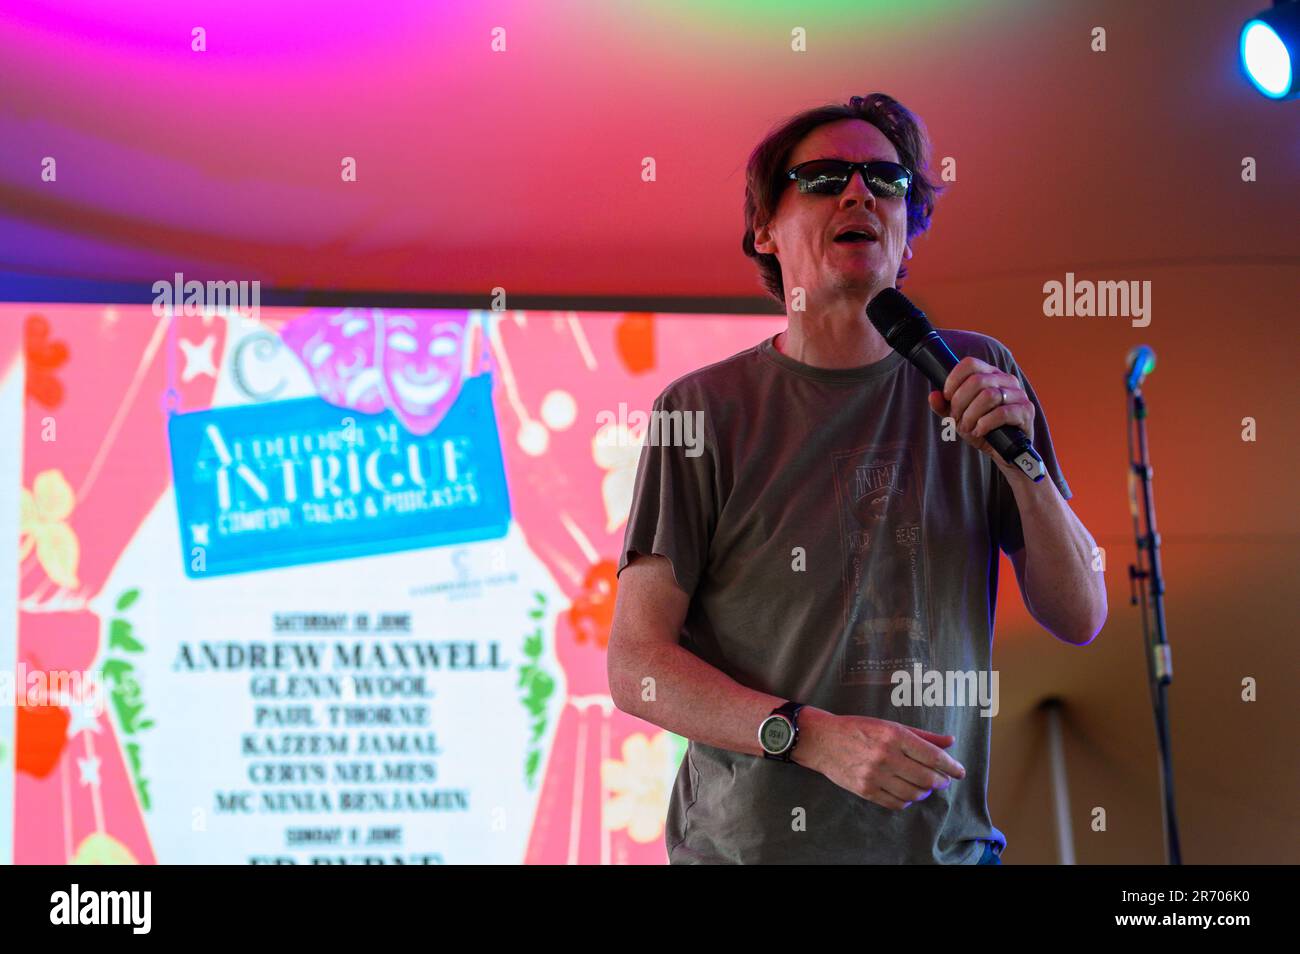 Childerley, Cambridgeshire, UK. 11th June, 2023. Ed Byrne performing at Day 3 Cambridge Club Festival 2023 Childerley, Cambridgeshire, UK. 11th June, 2023. Credit: Gary Stafford/Alamy Live News Credit: Gary Stafford/Alamy Live News Stock Photo